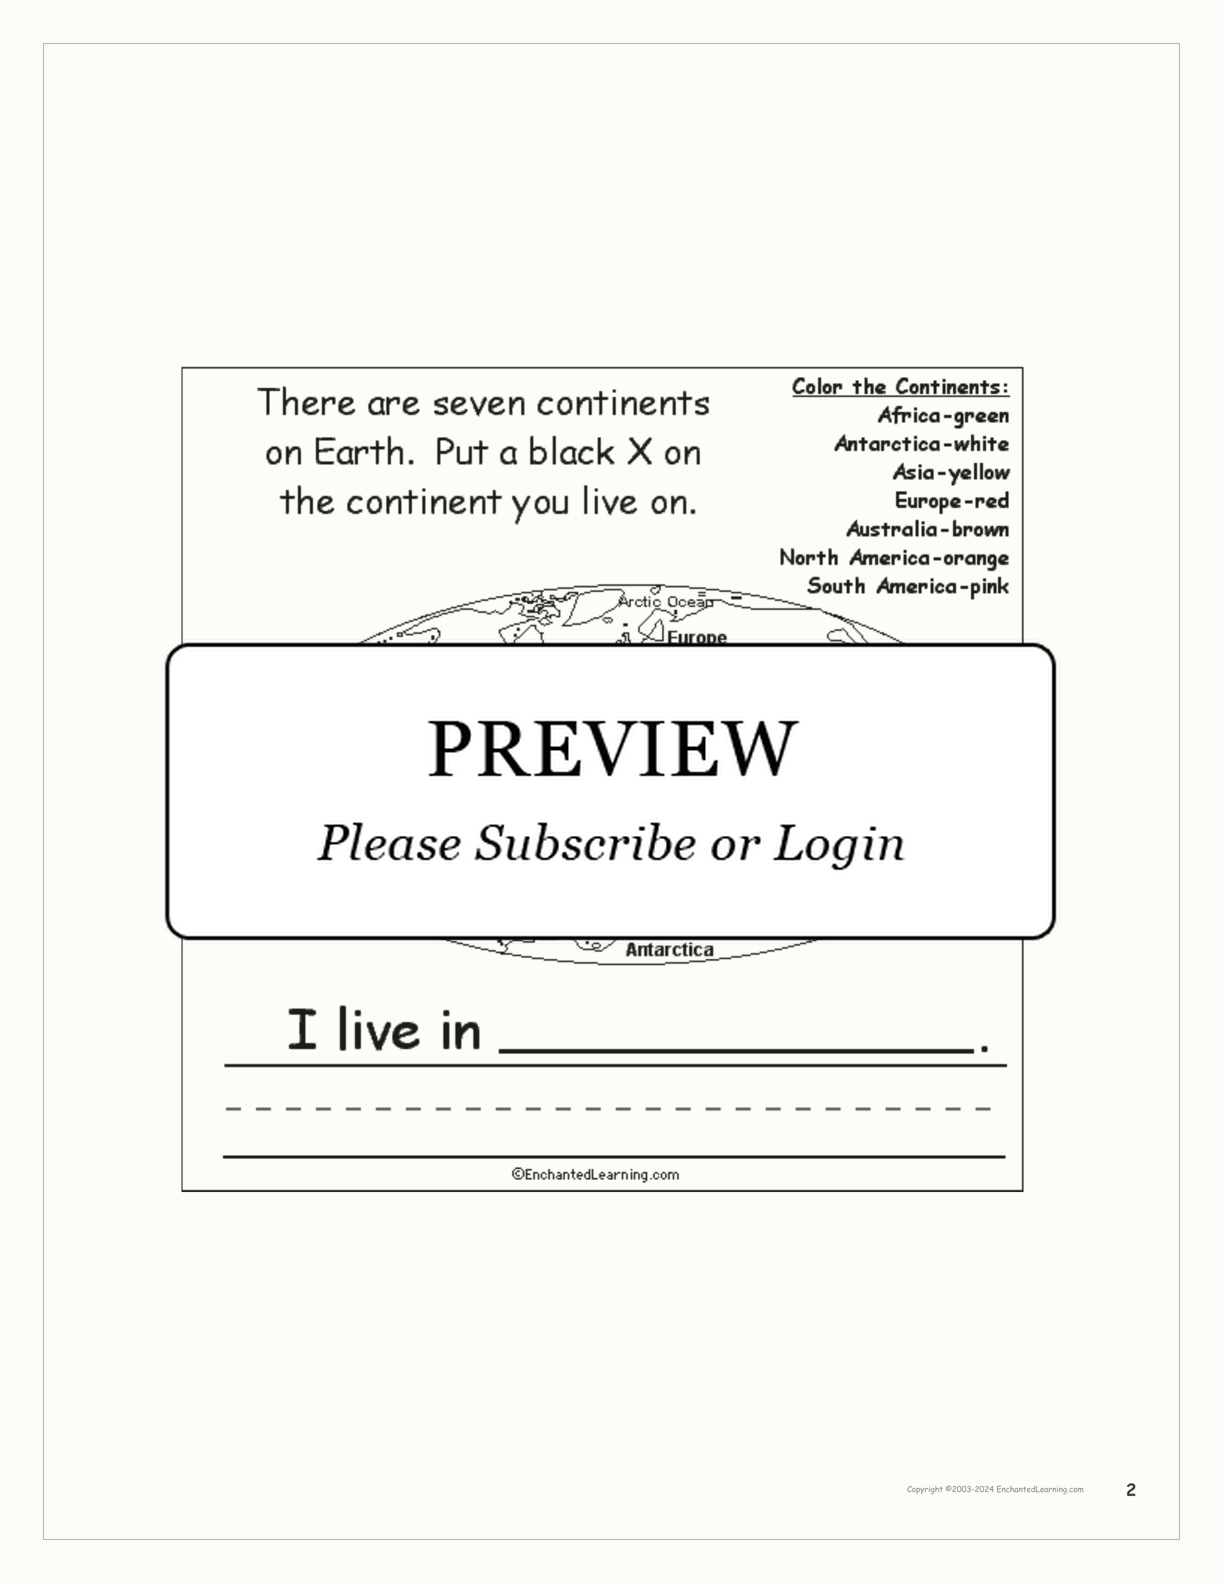 The Seven Continents Book interactive printout page 2